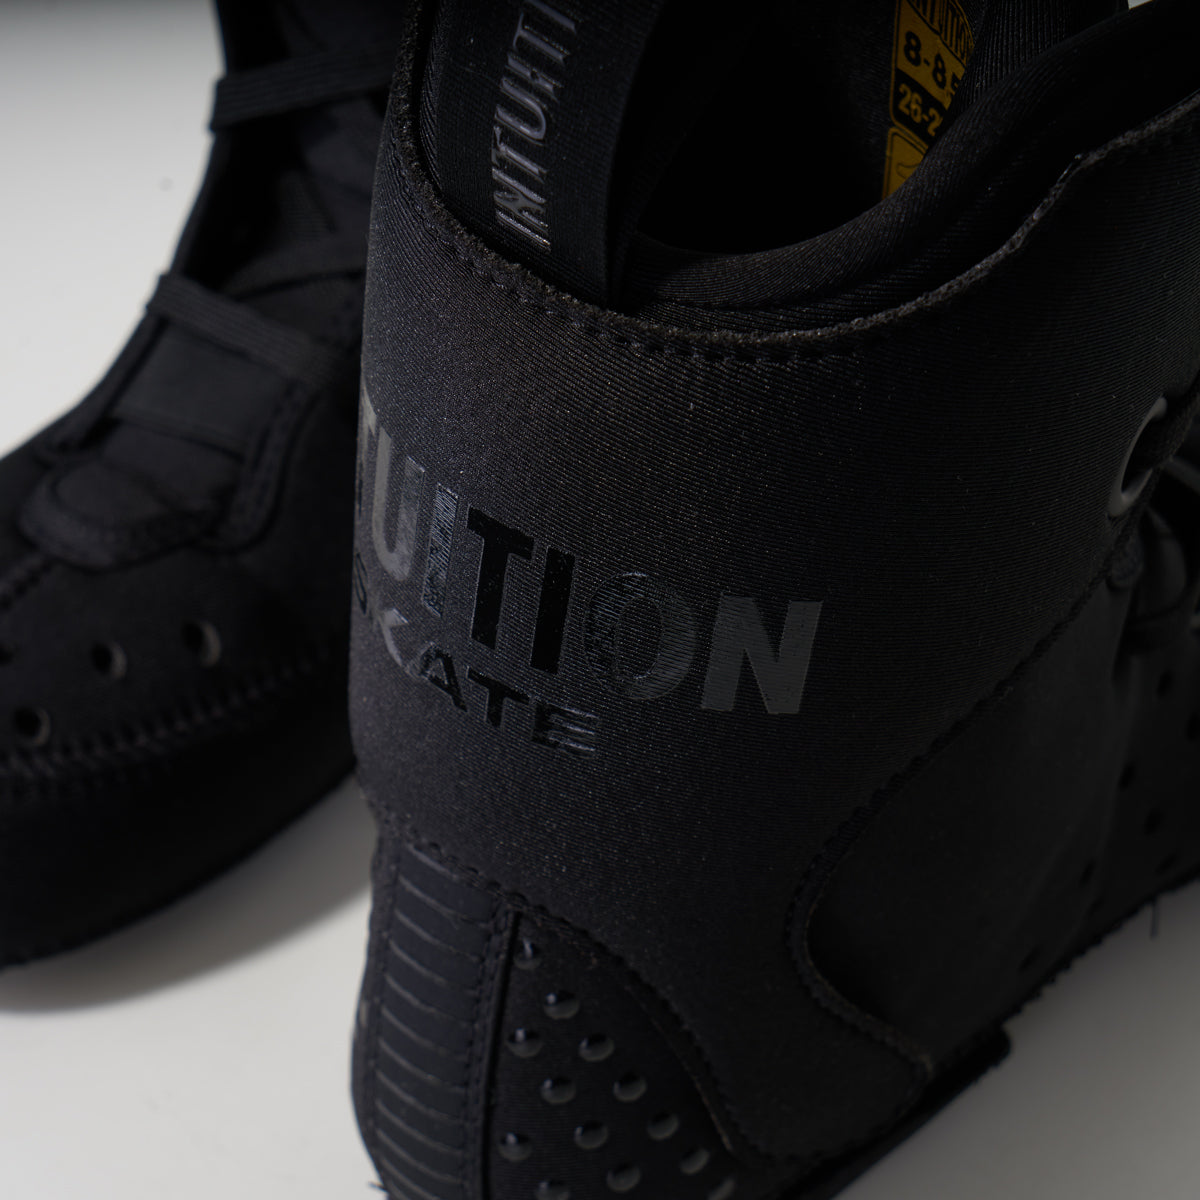 Intuition Skate Premium Liners